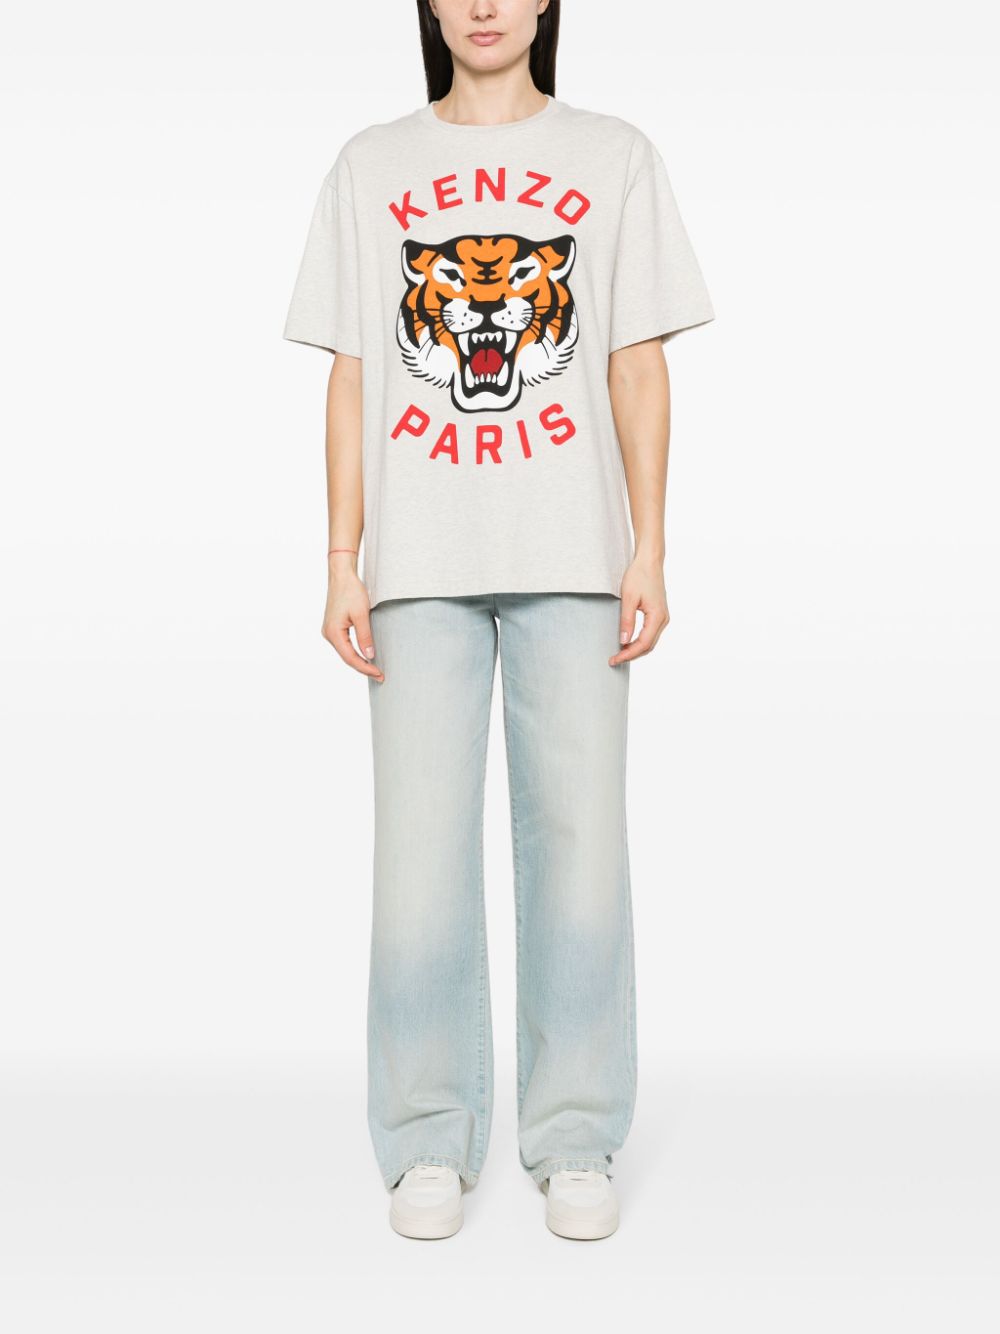 Lucky Tiger cotton T-shirt<BR/><BR/><BR/>